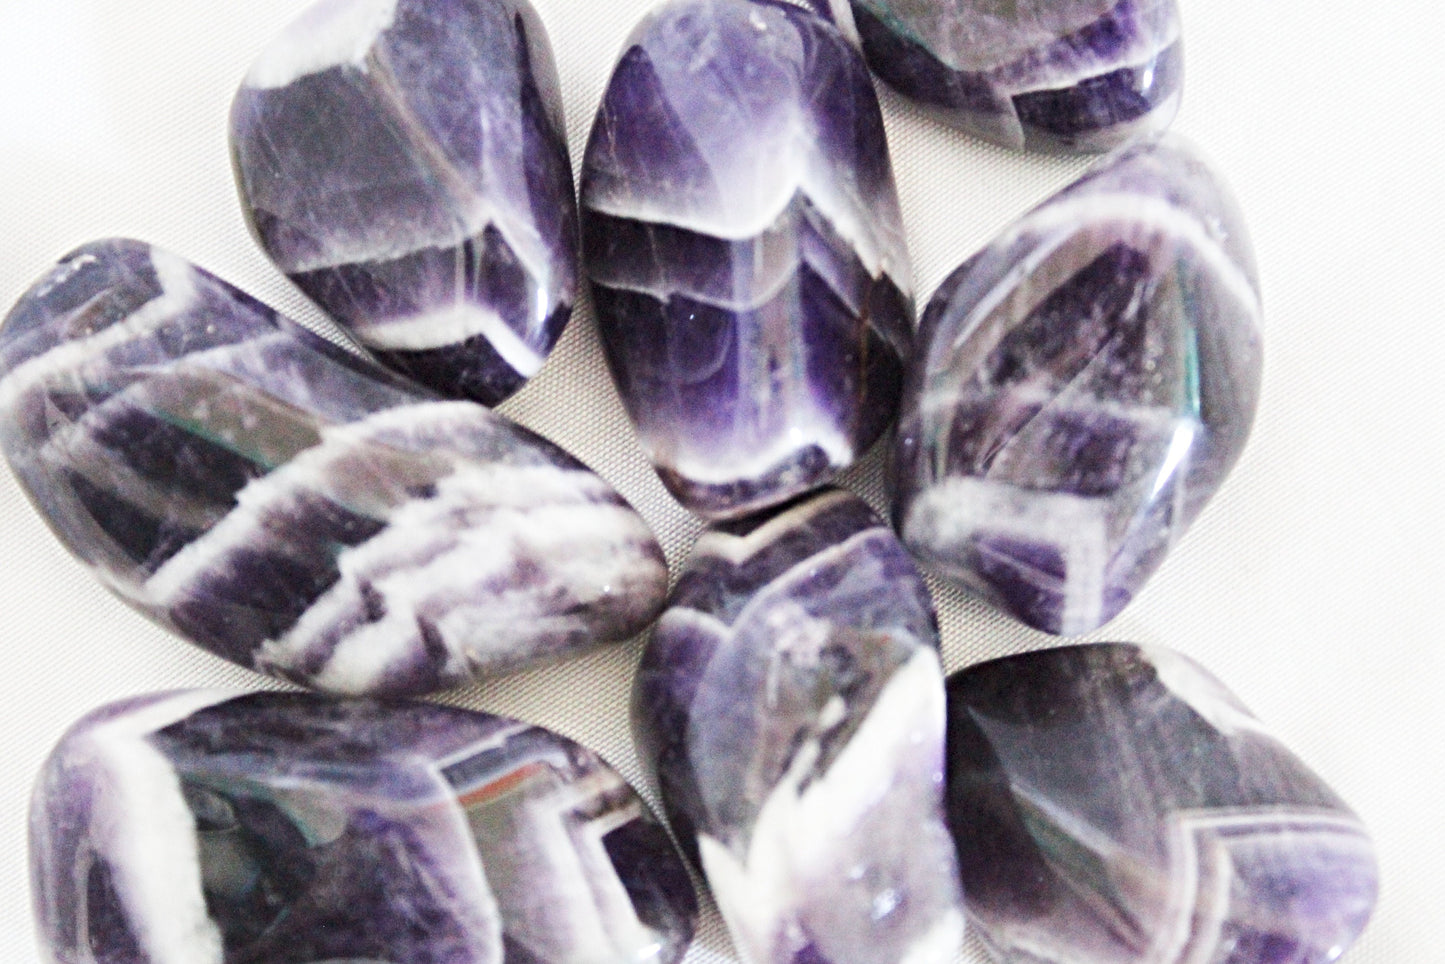 Chevron Amethyst Tumbled Stones (Ethically Sourced) - Wildflower Moon Magic